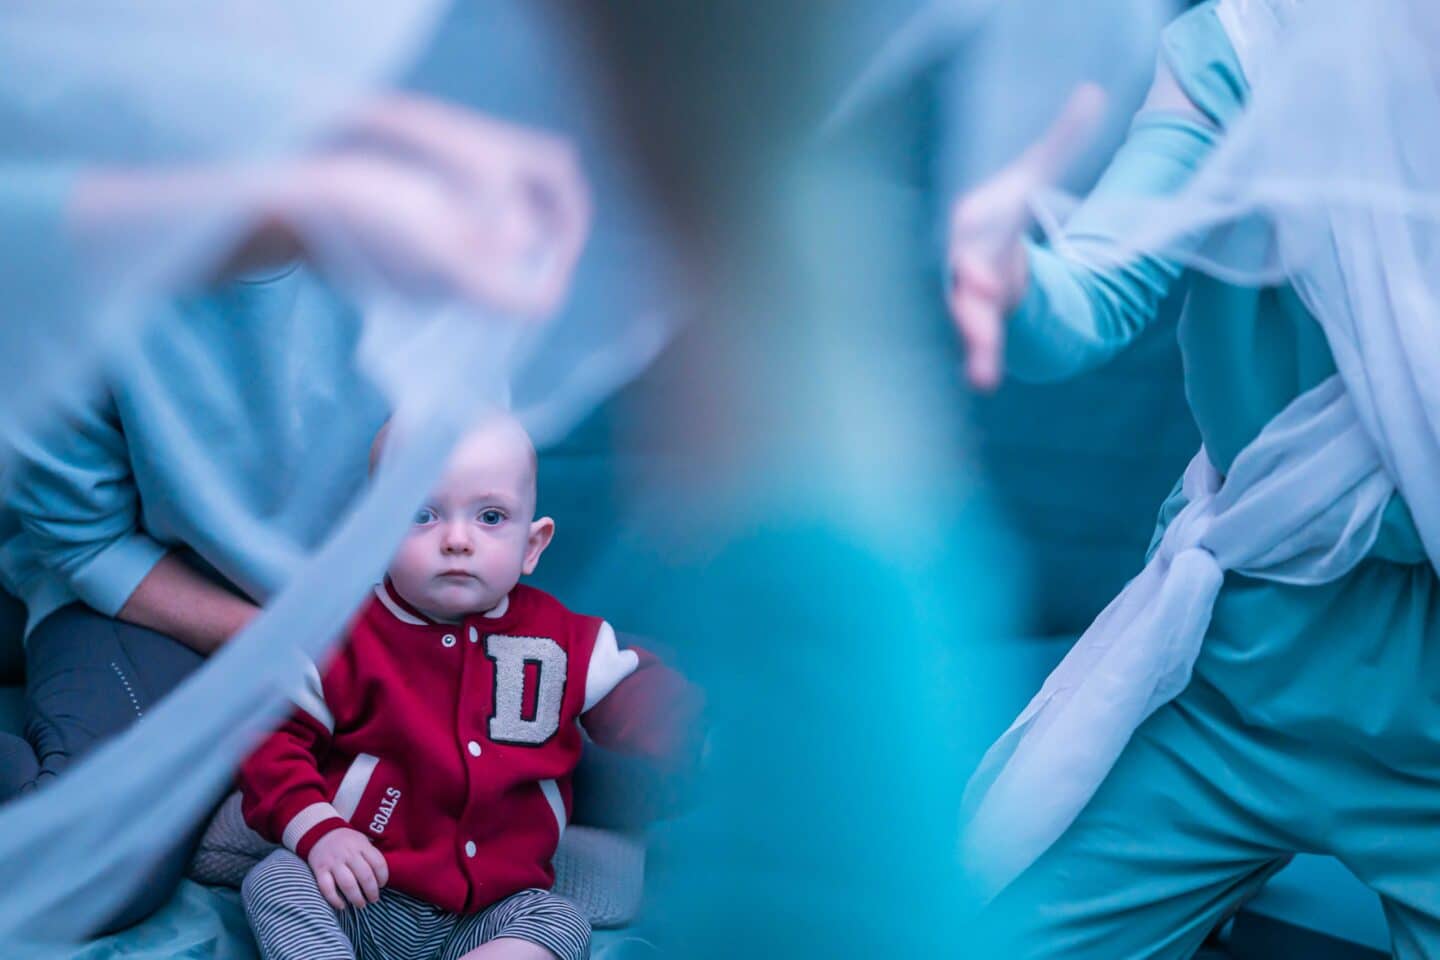 a baby stares at moving chiffons. we can see the vague outline of the performers moving them